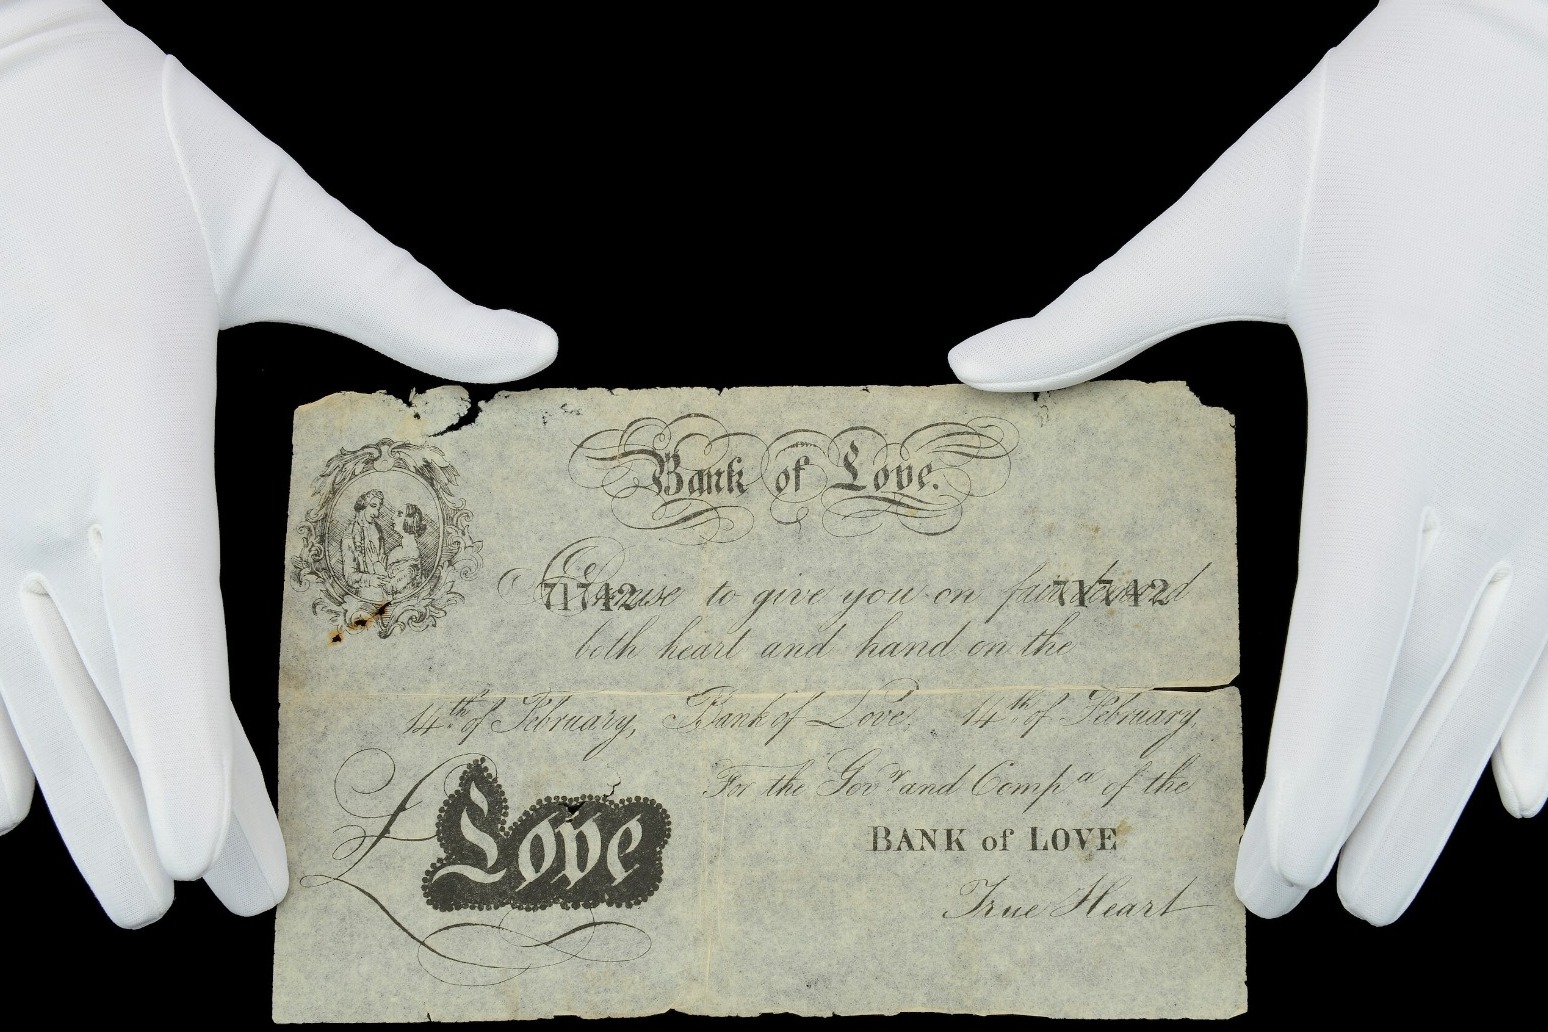 Valentines Day banknotes from 19th century to go under the hammer